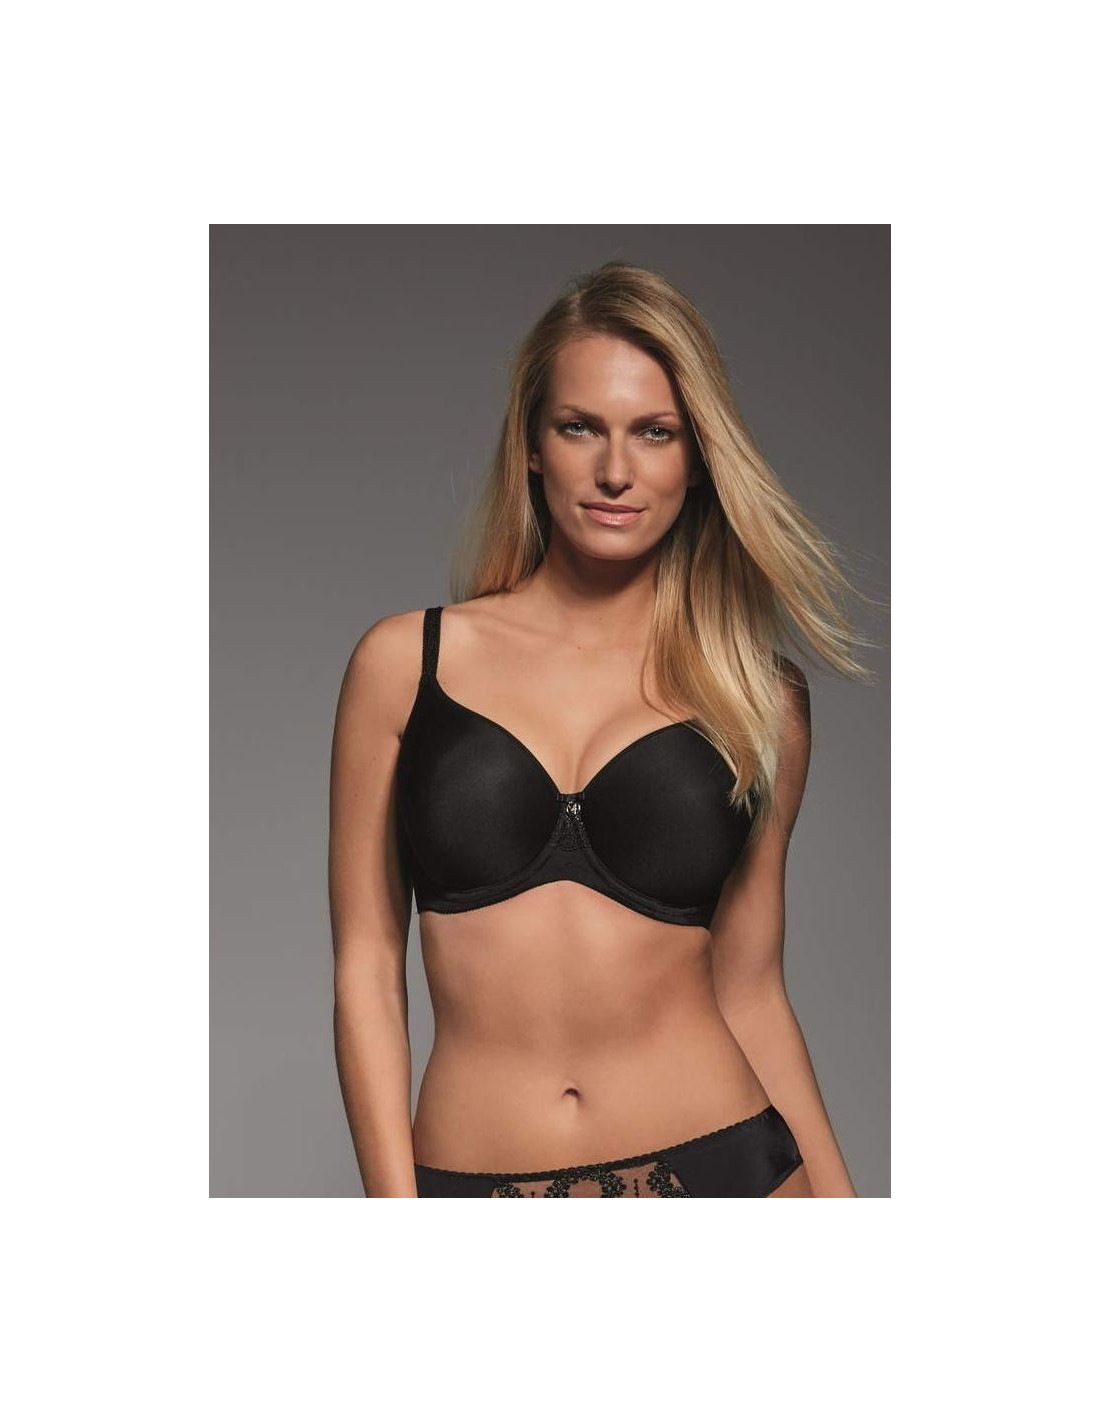 Plus Size Bra 3D Lightweight Spacer Cups for Delicate Skin - Krisline  FORTUNA SPACER